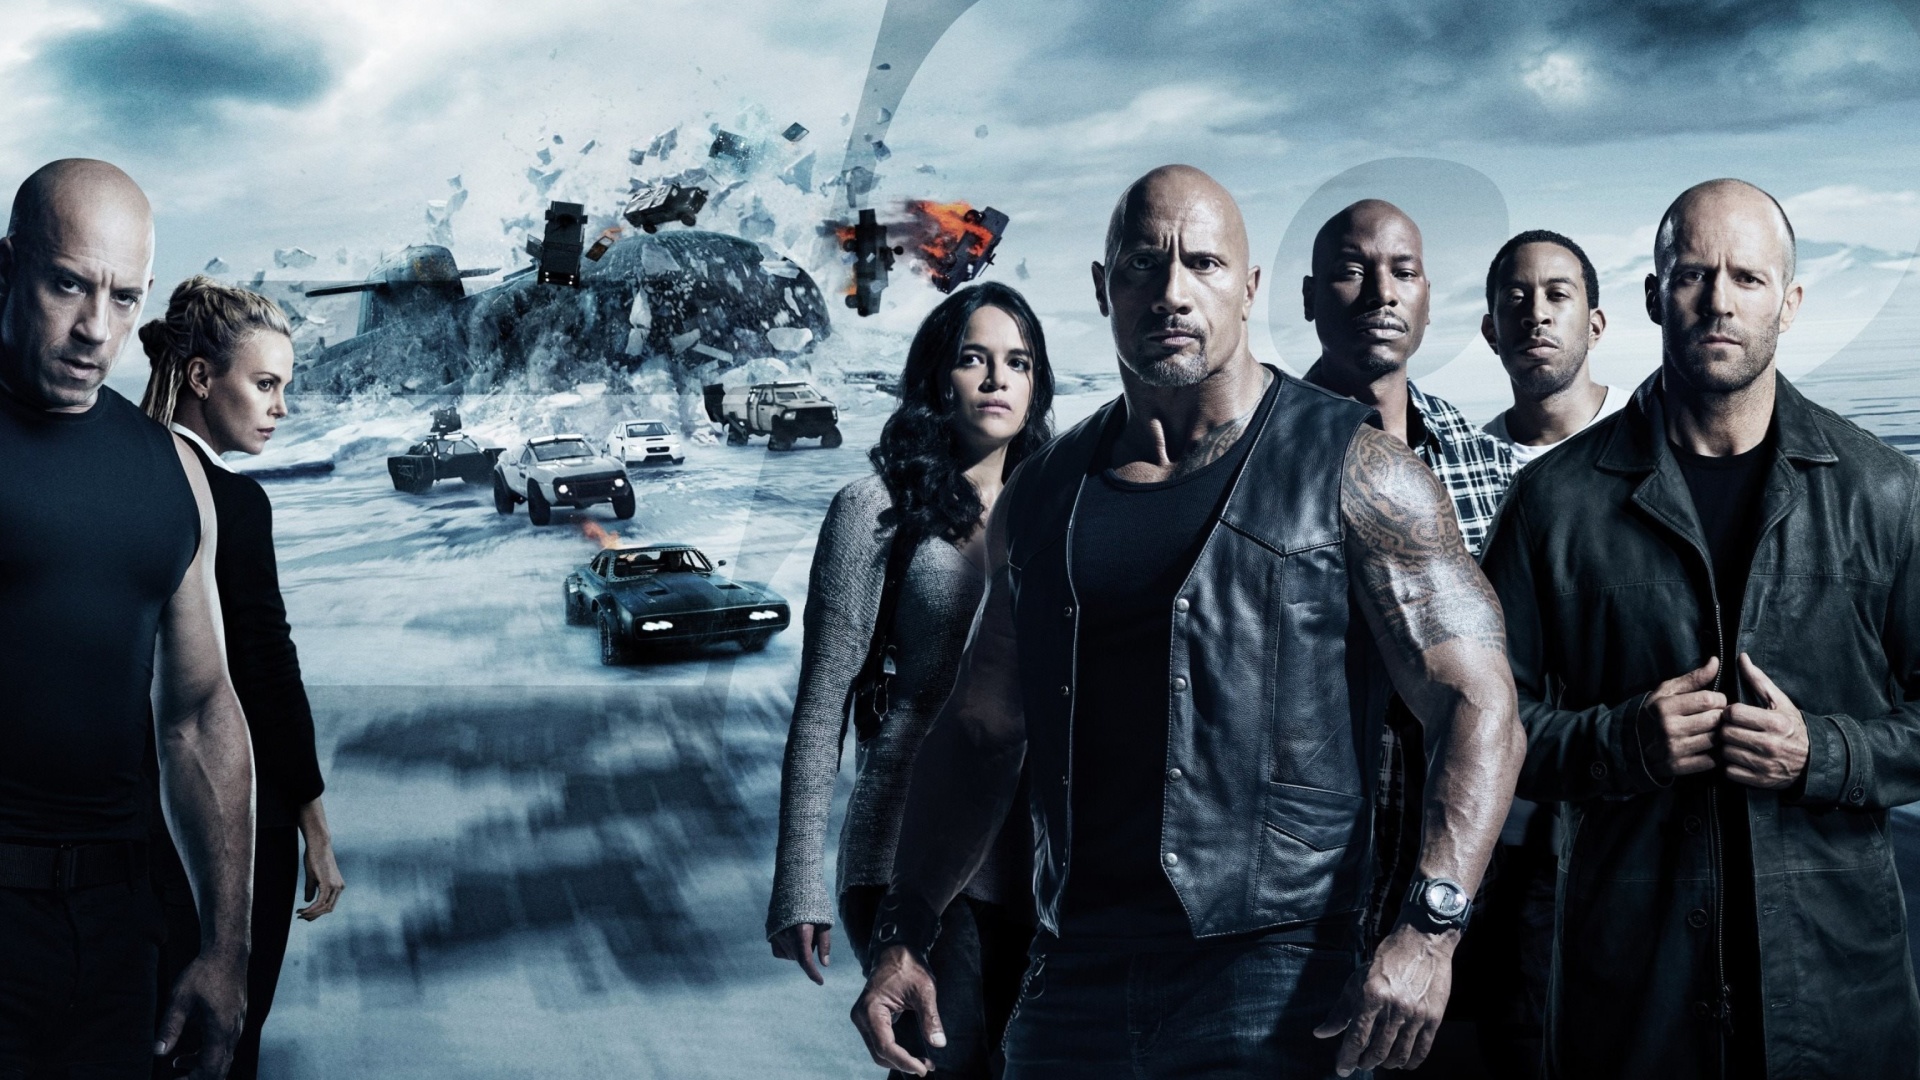 Das The Fate of the Furious with Vin Diesel, Dwayne Johnson, Charlize Theron Wallpaper 1920x1080